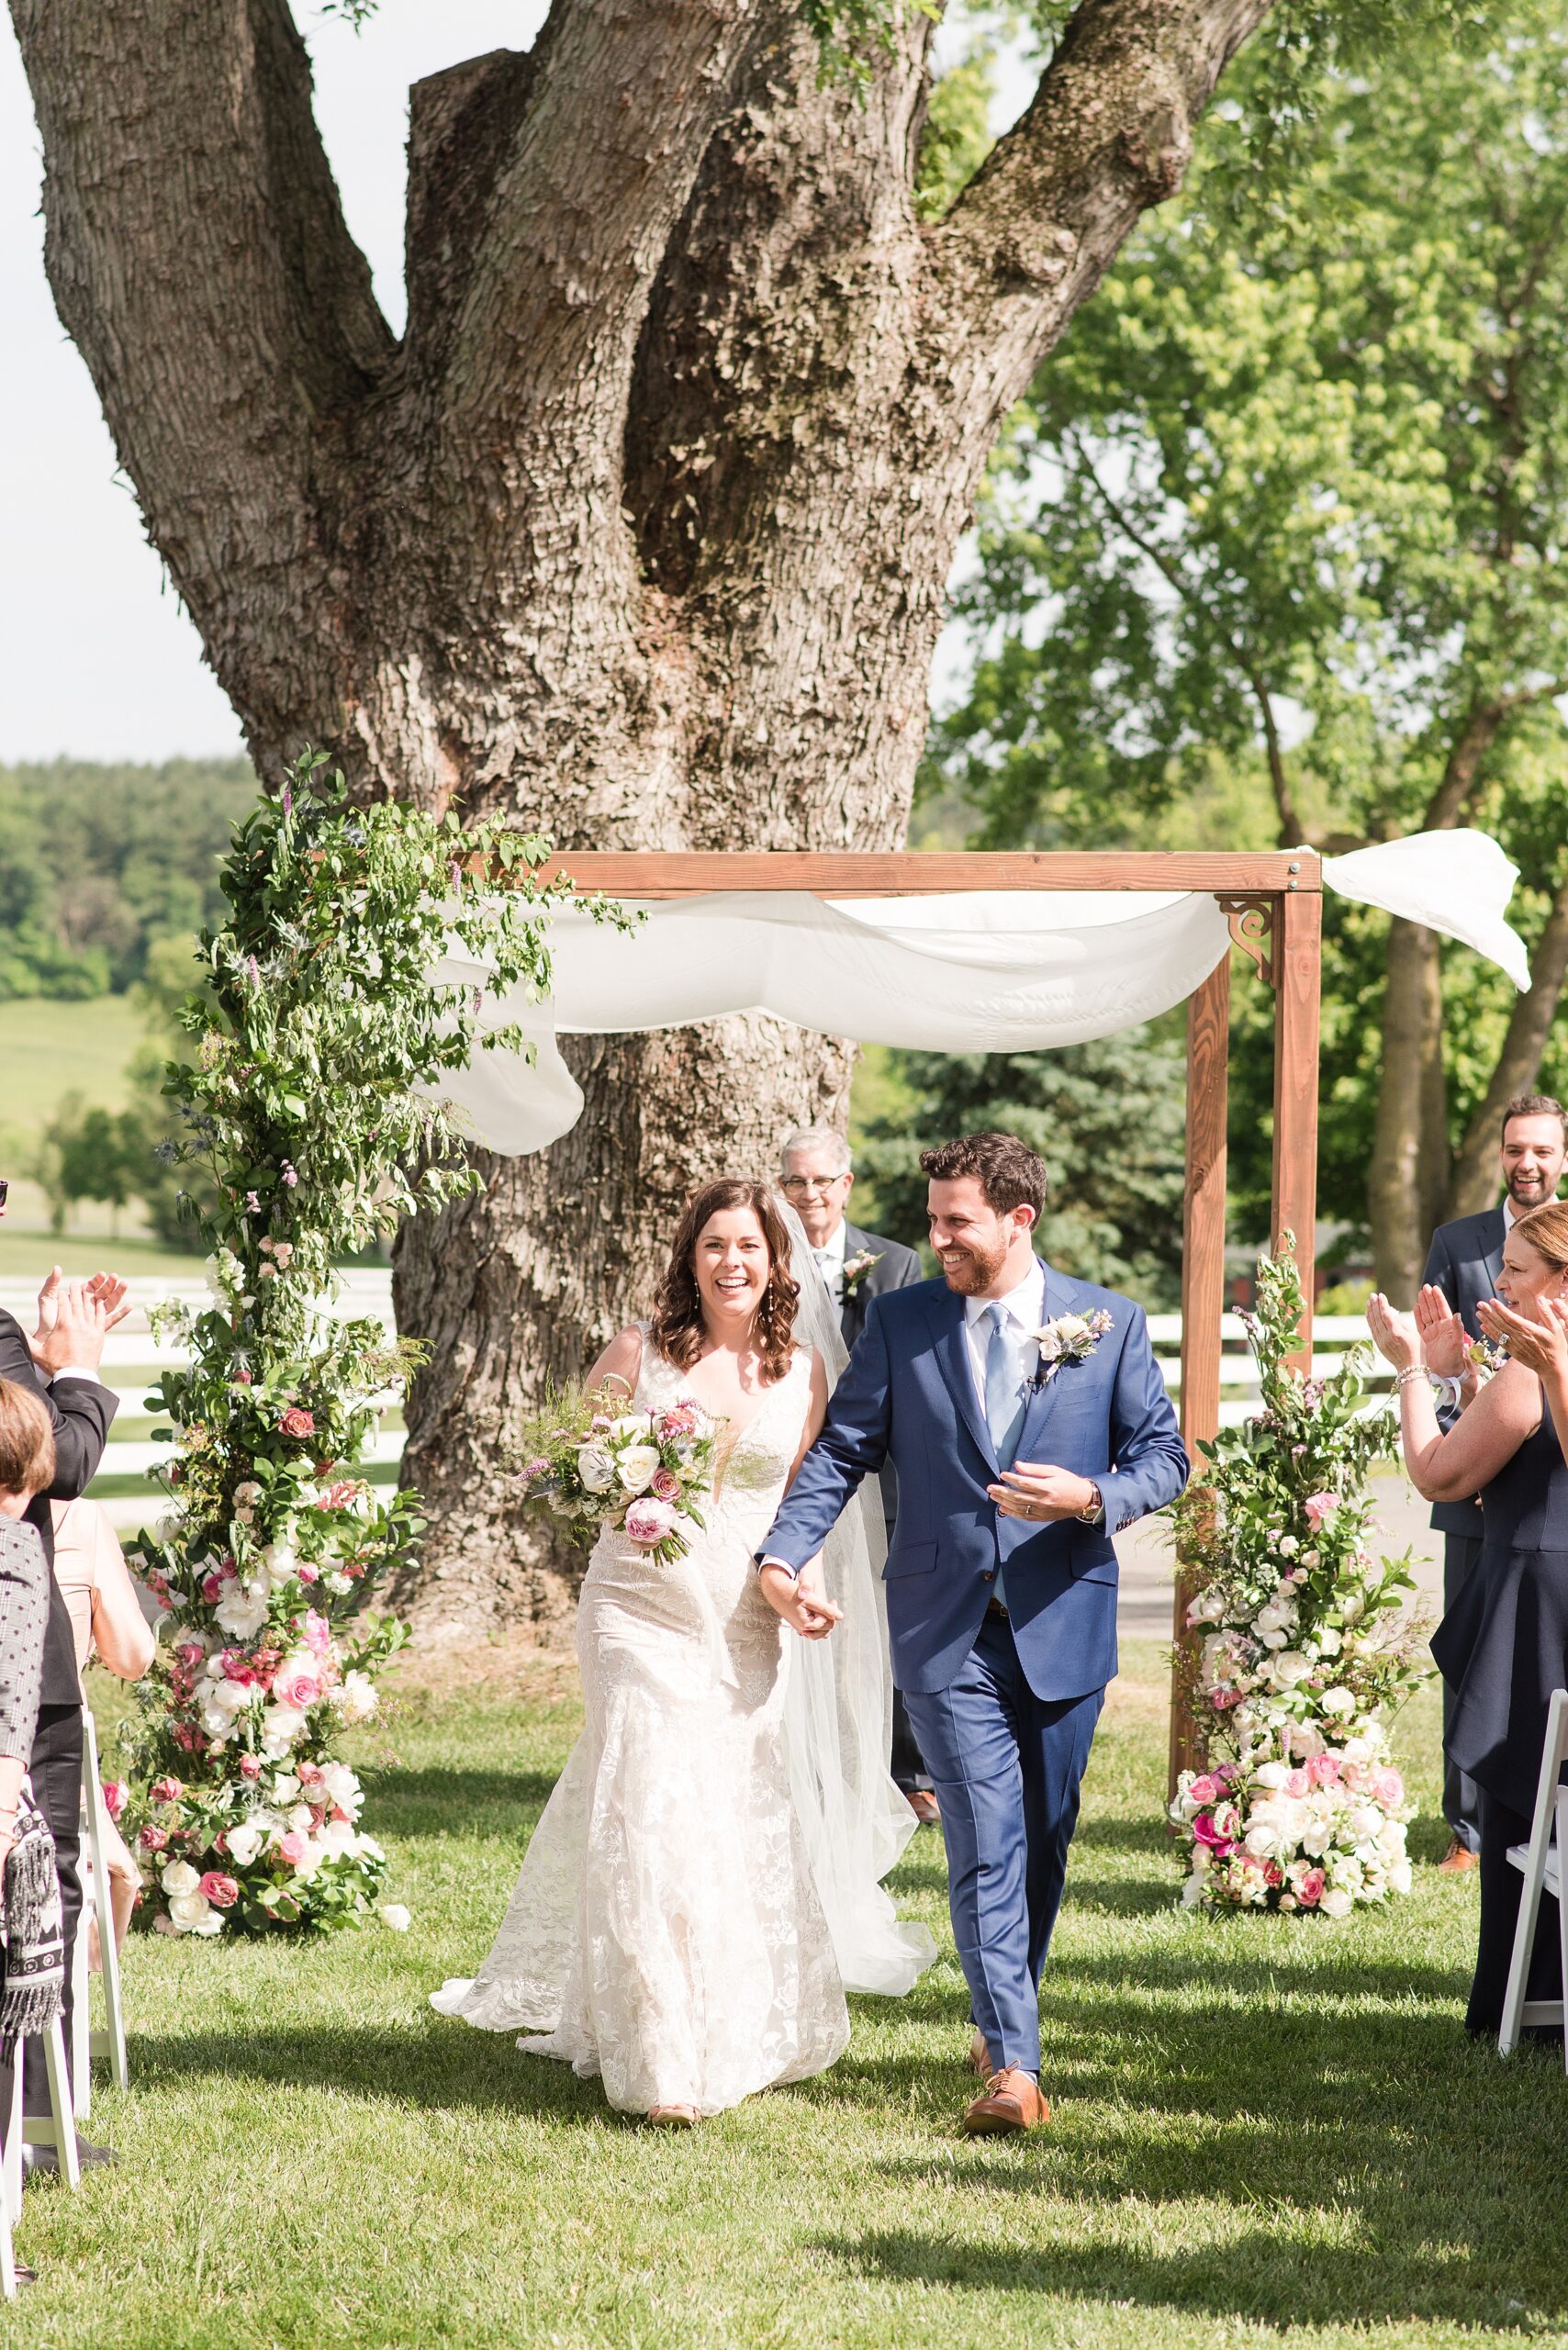 Newlyweds smile while holding hands and exiting their outdoor wedding ceremony to applause